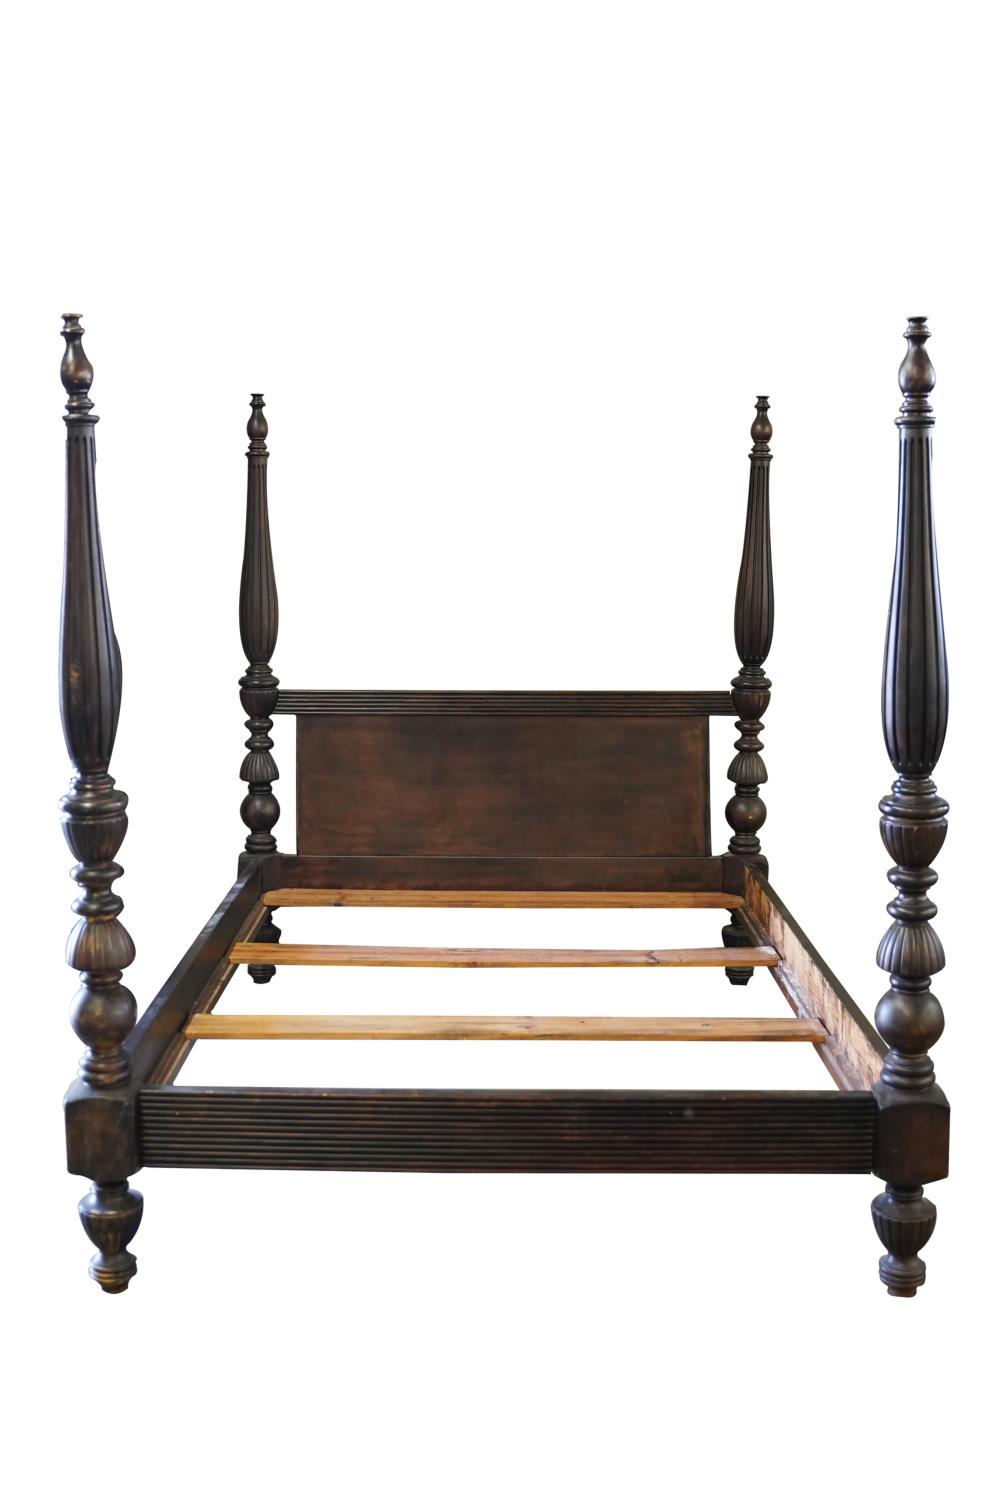 CARVED WOOD FOUR-POSTER QUEEN-SIZED